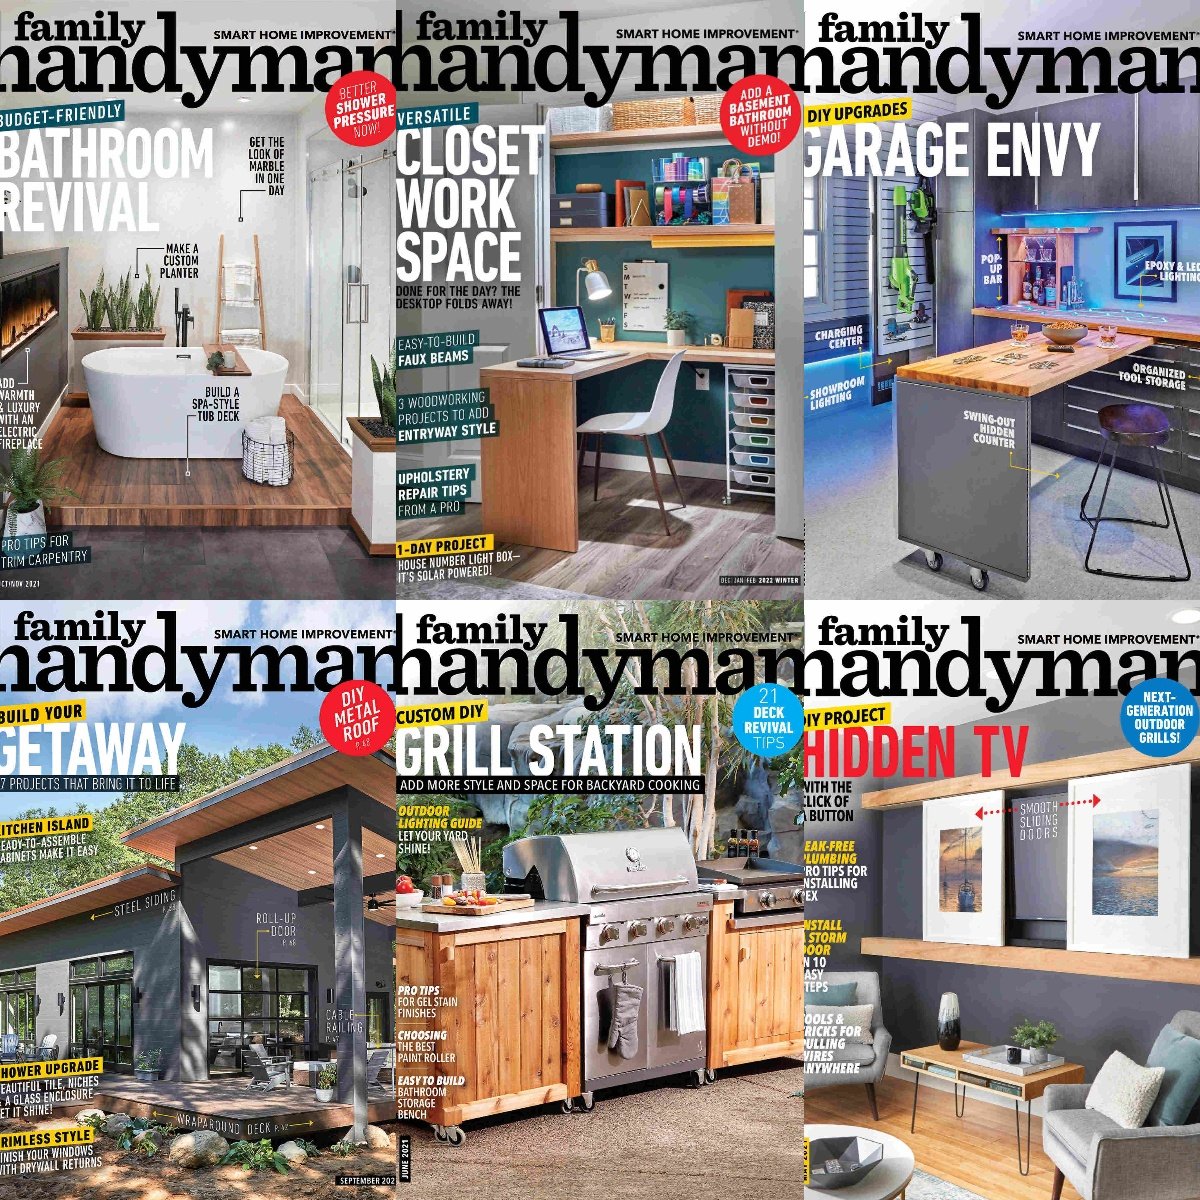 Family Handyman – Full Year 2021 Issues Collection